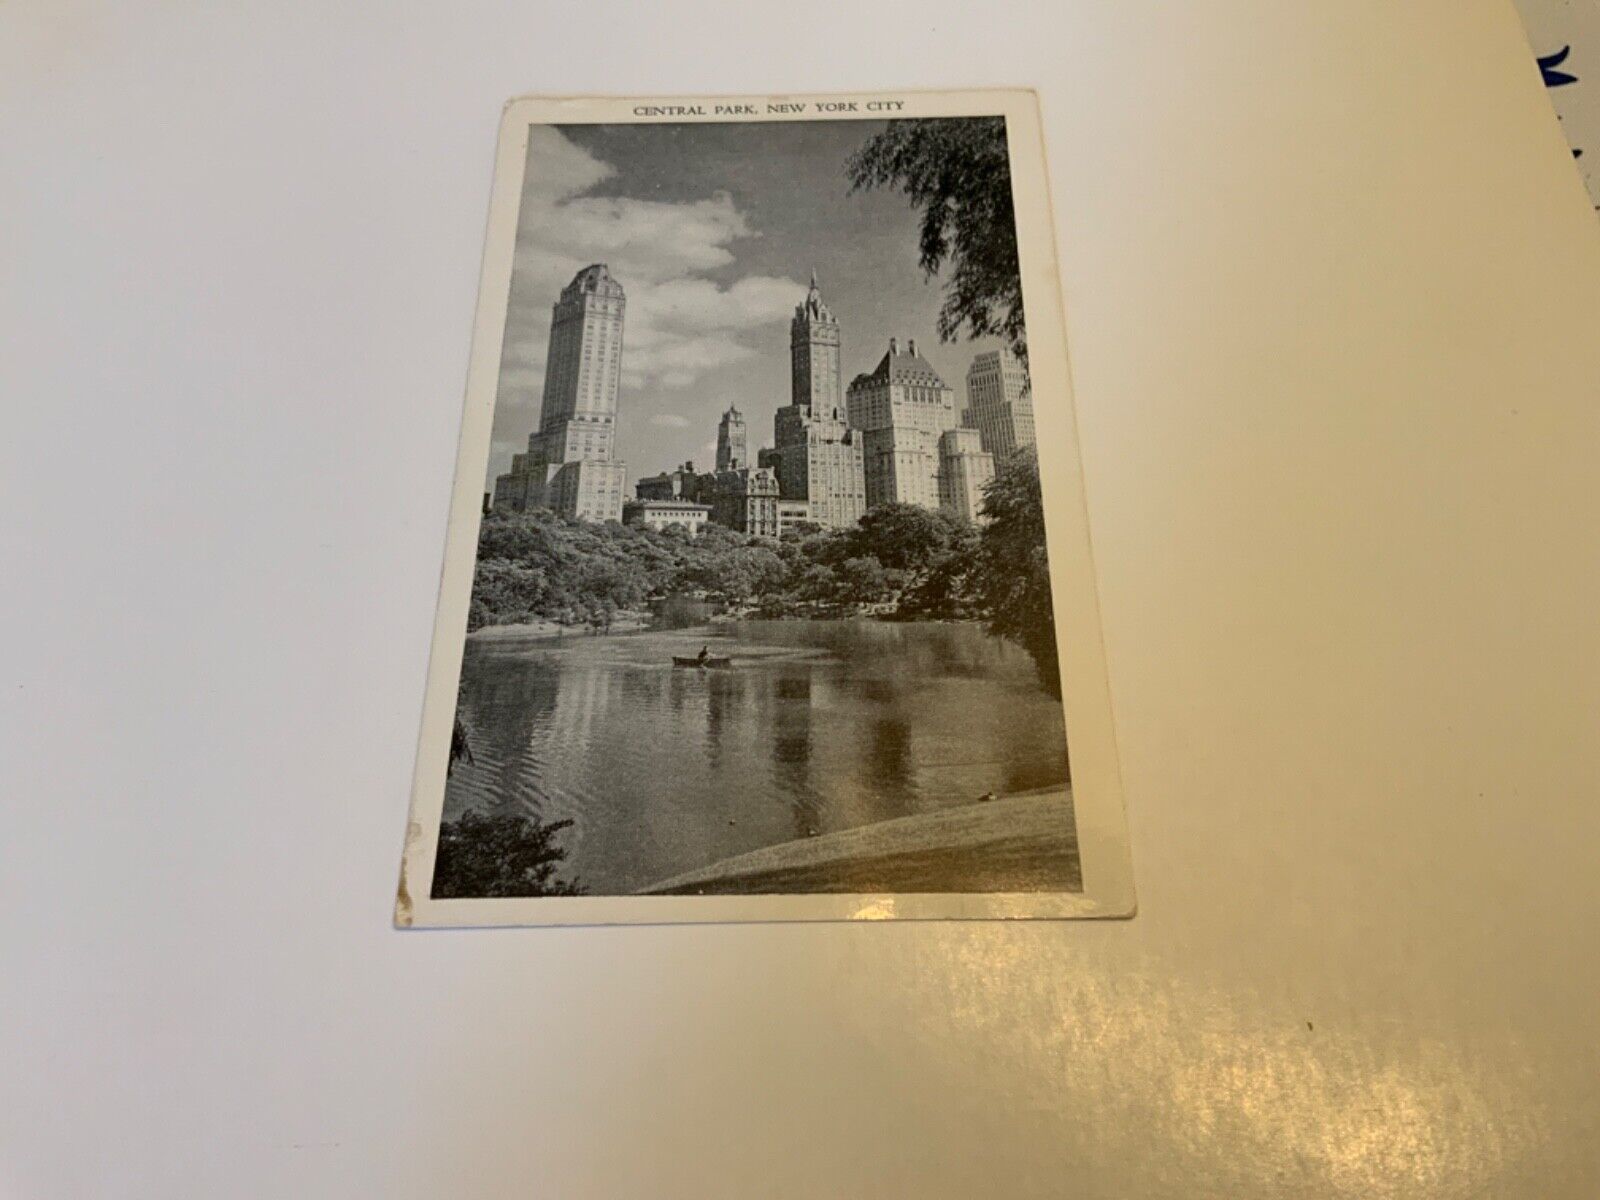 New York City, N.Y. ~ Central Park Lake Towards 5th Ave. - Real Photo Postcard